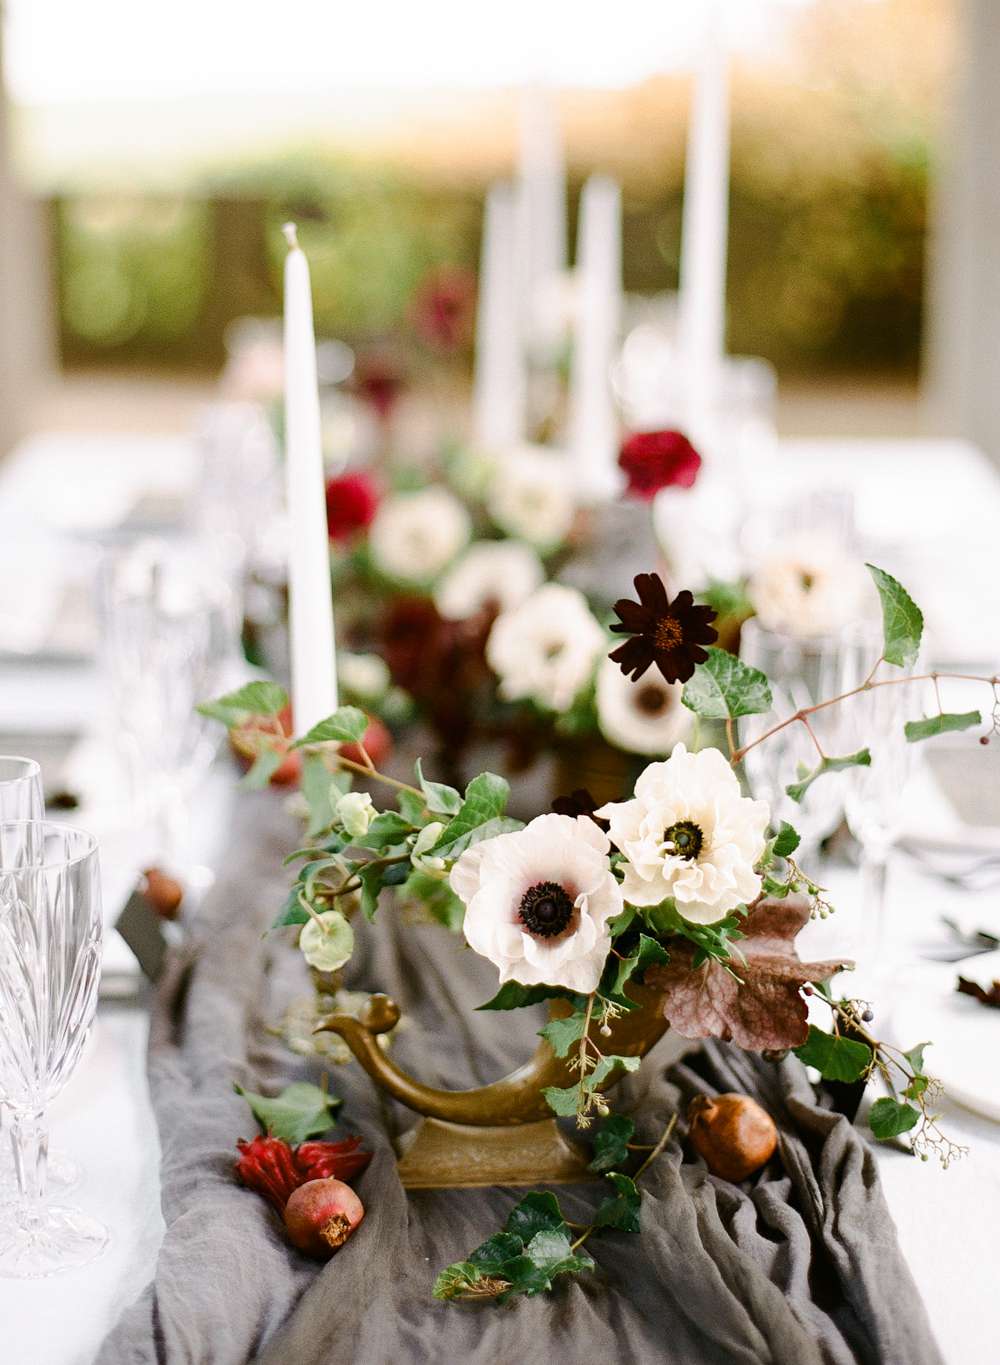 French Horn Centerpieces